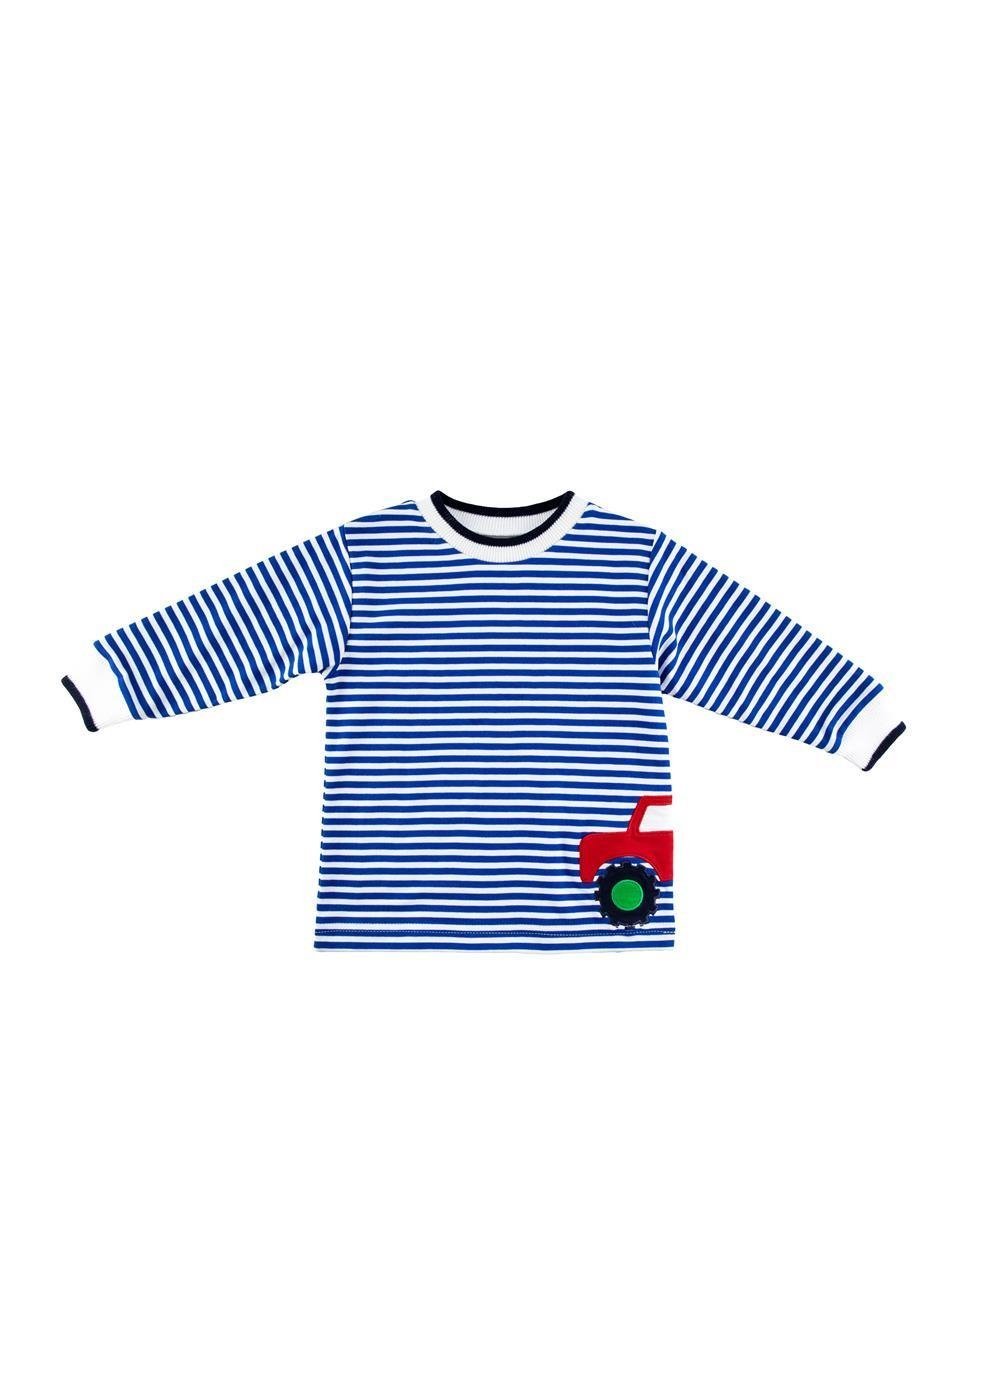 Stripe Knit Shirt with Monster Truck Long Sleeve Navy and White